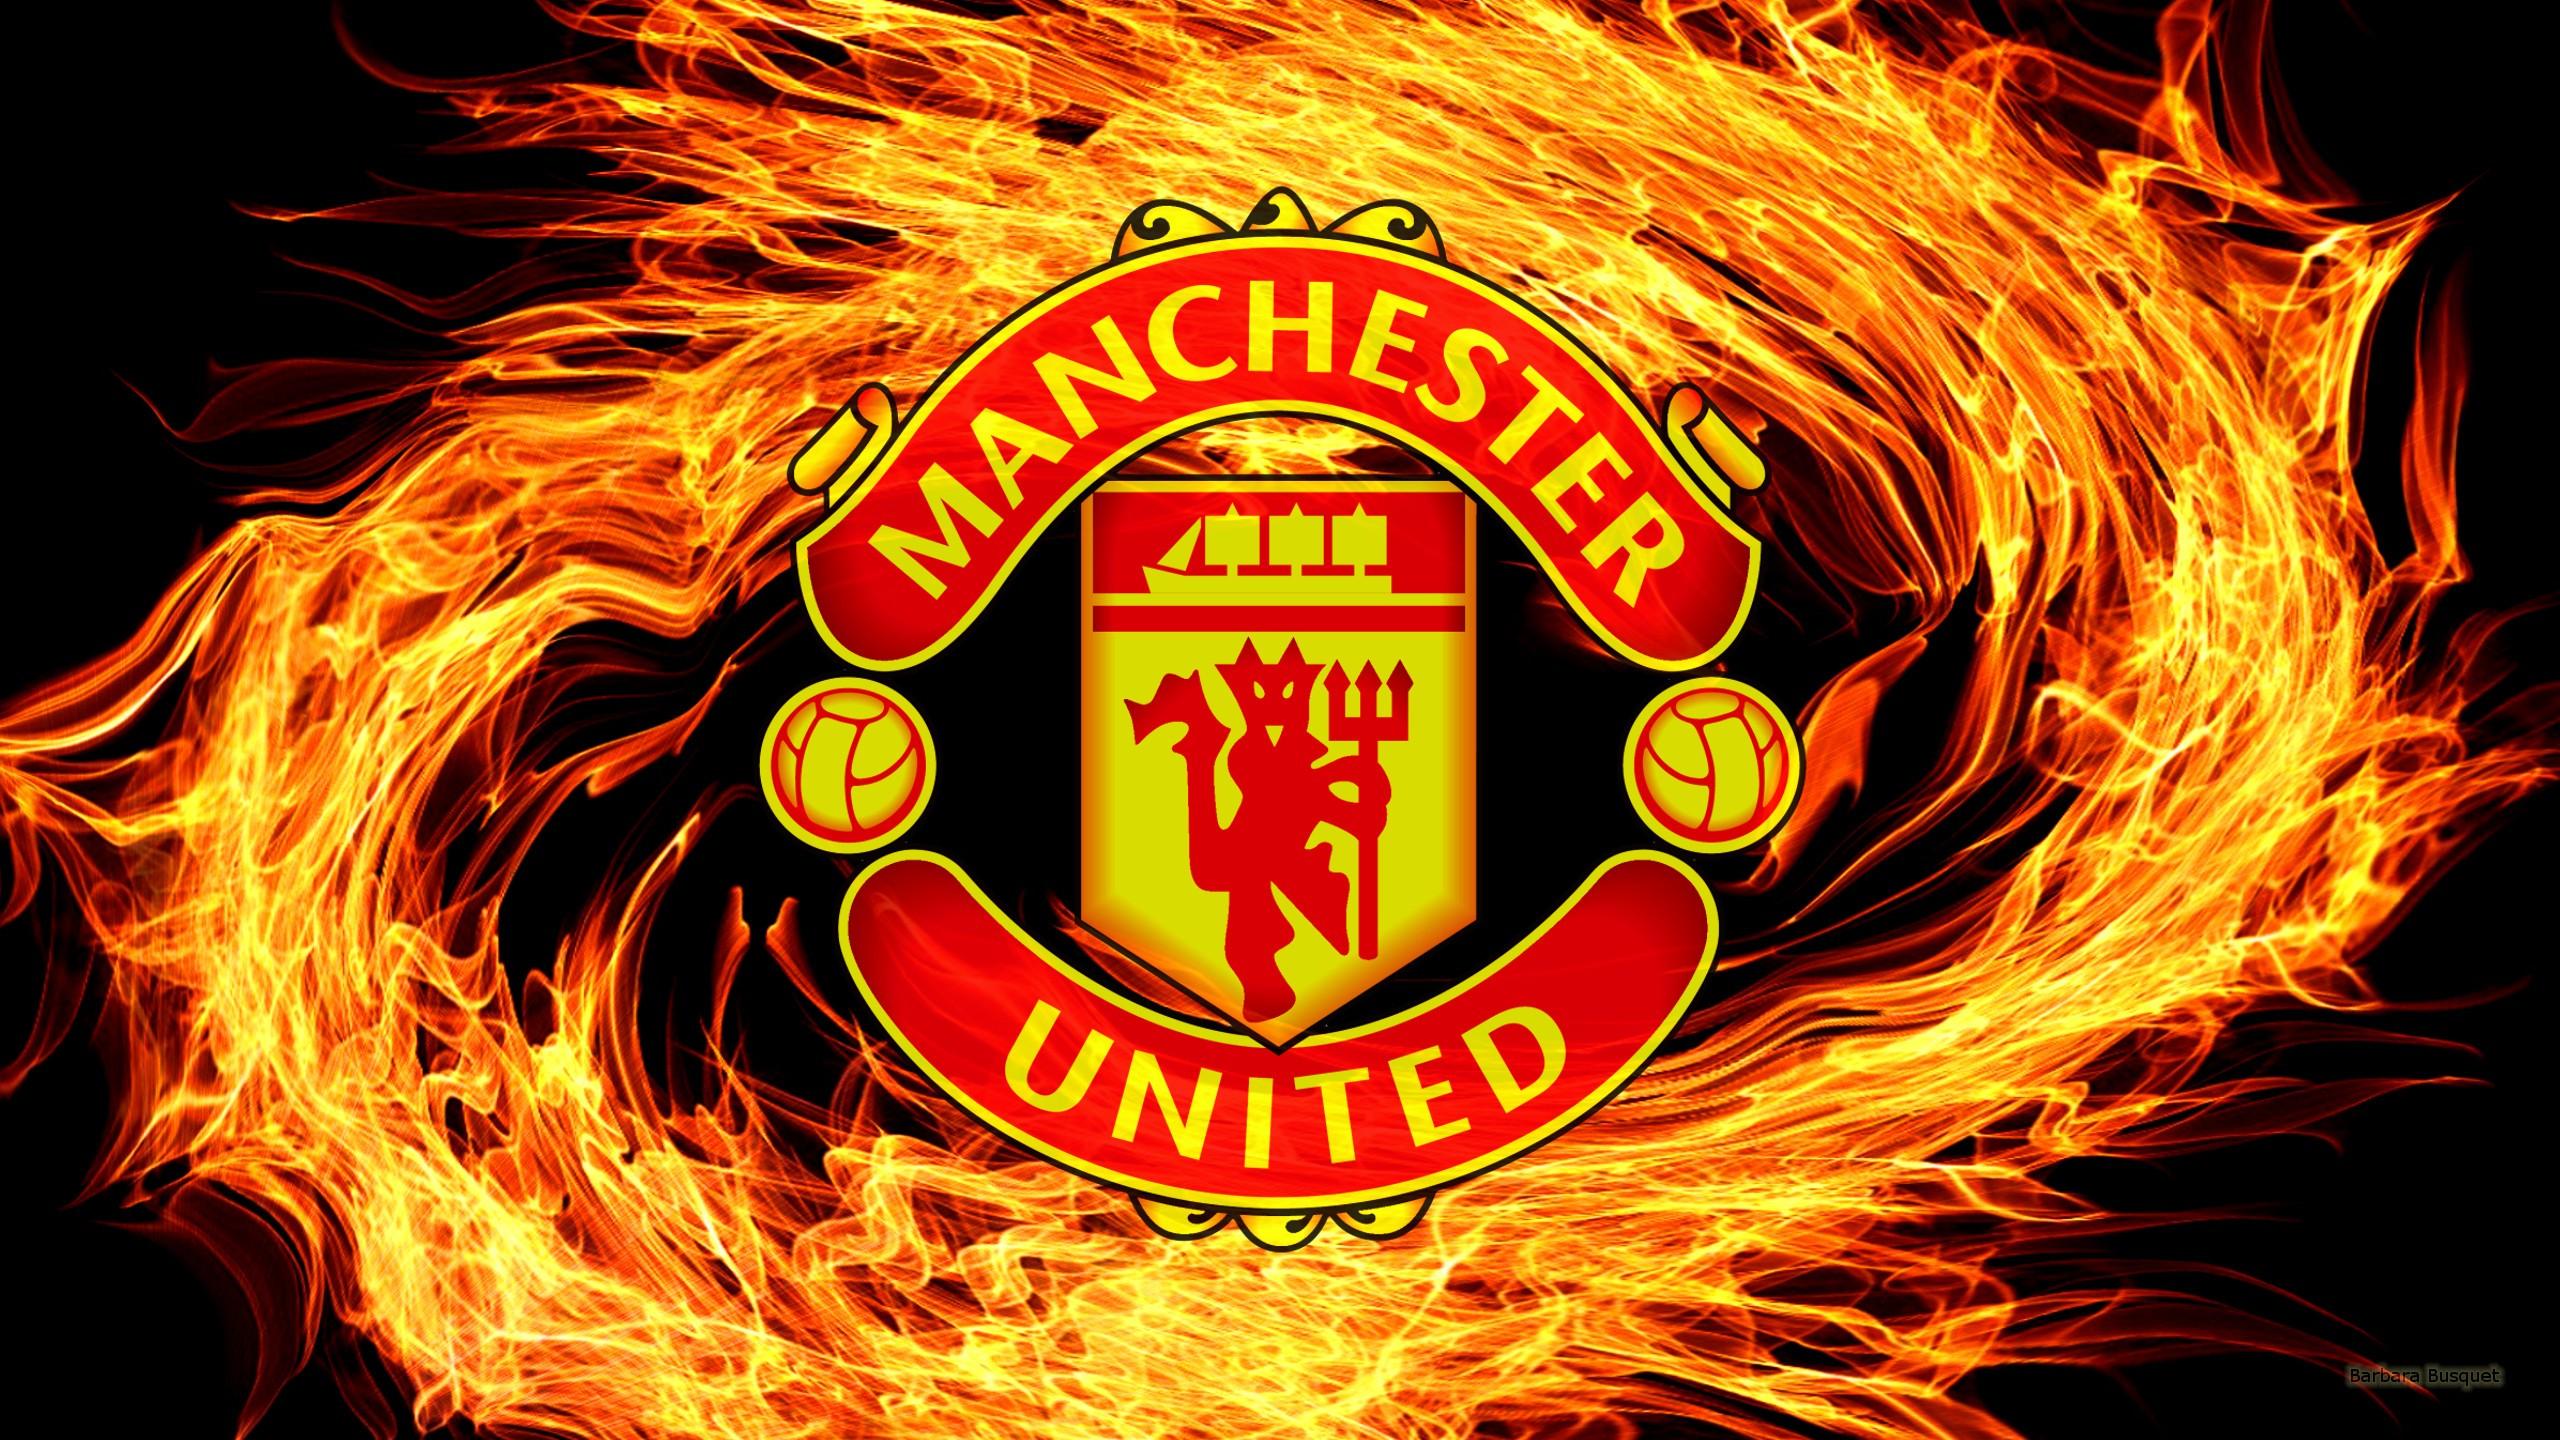 2560 x 1440 · jpeg - Manchester United wallpaper 1 Download free cool full HD wallpapers ...